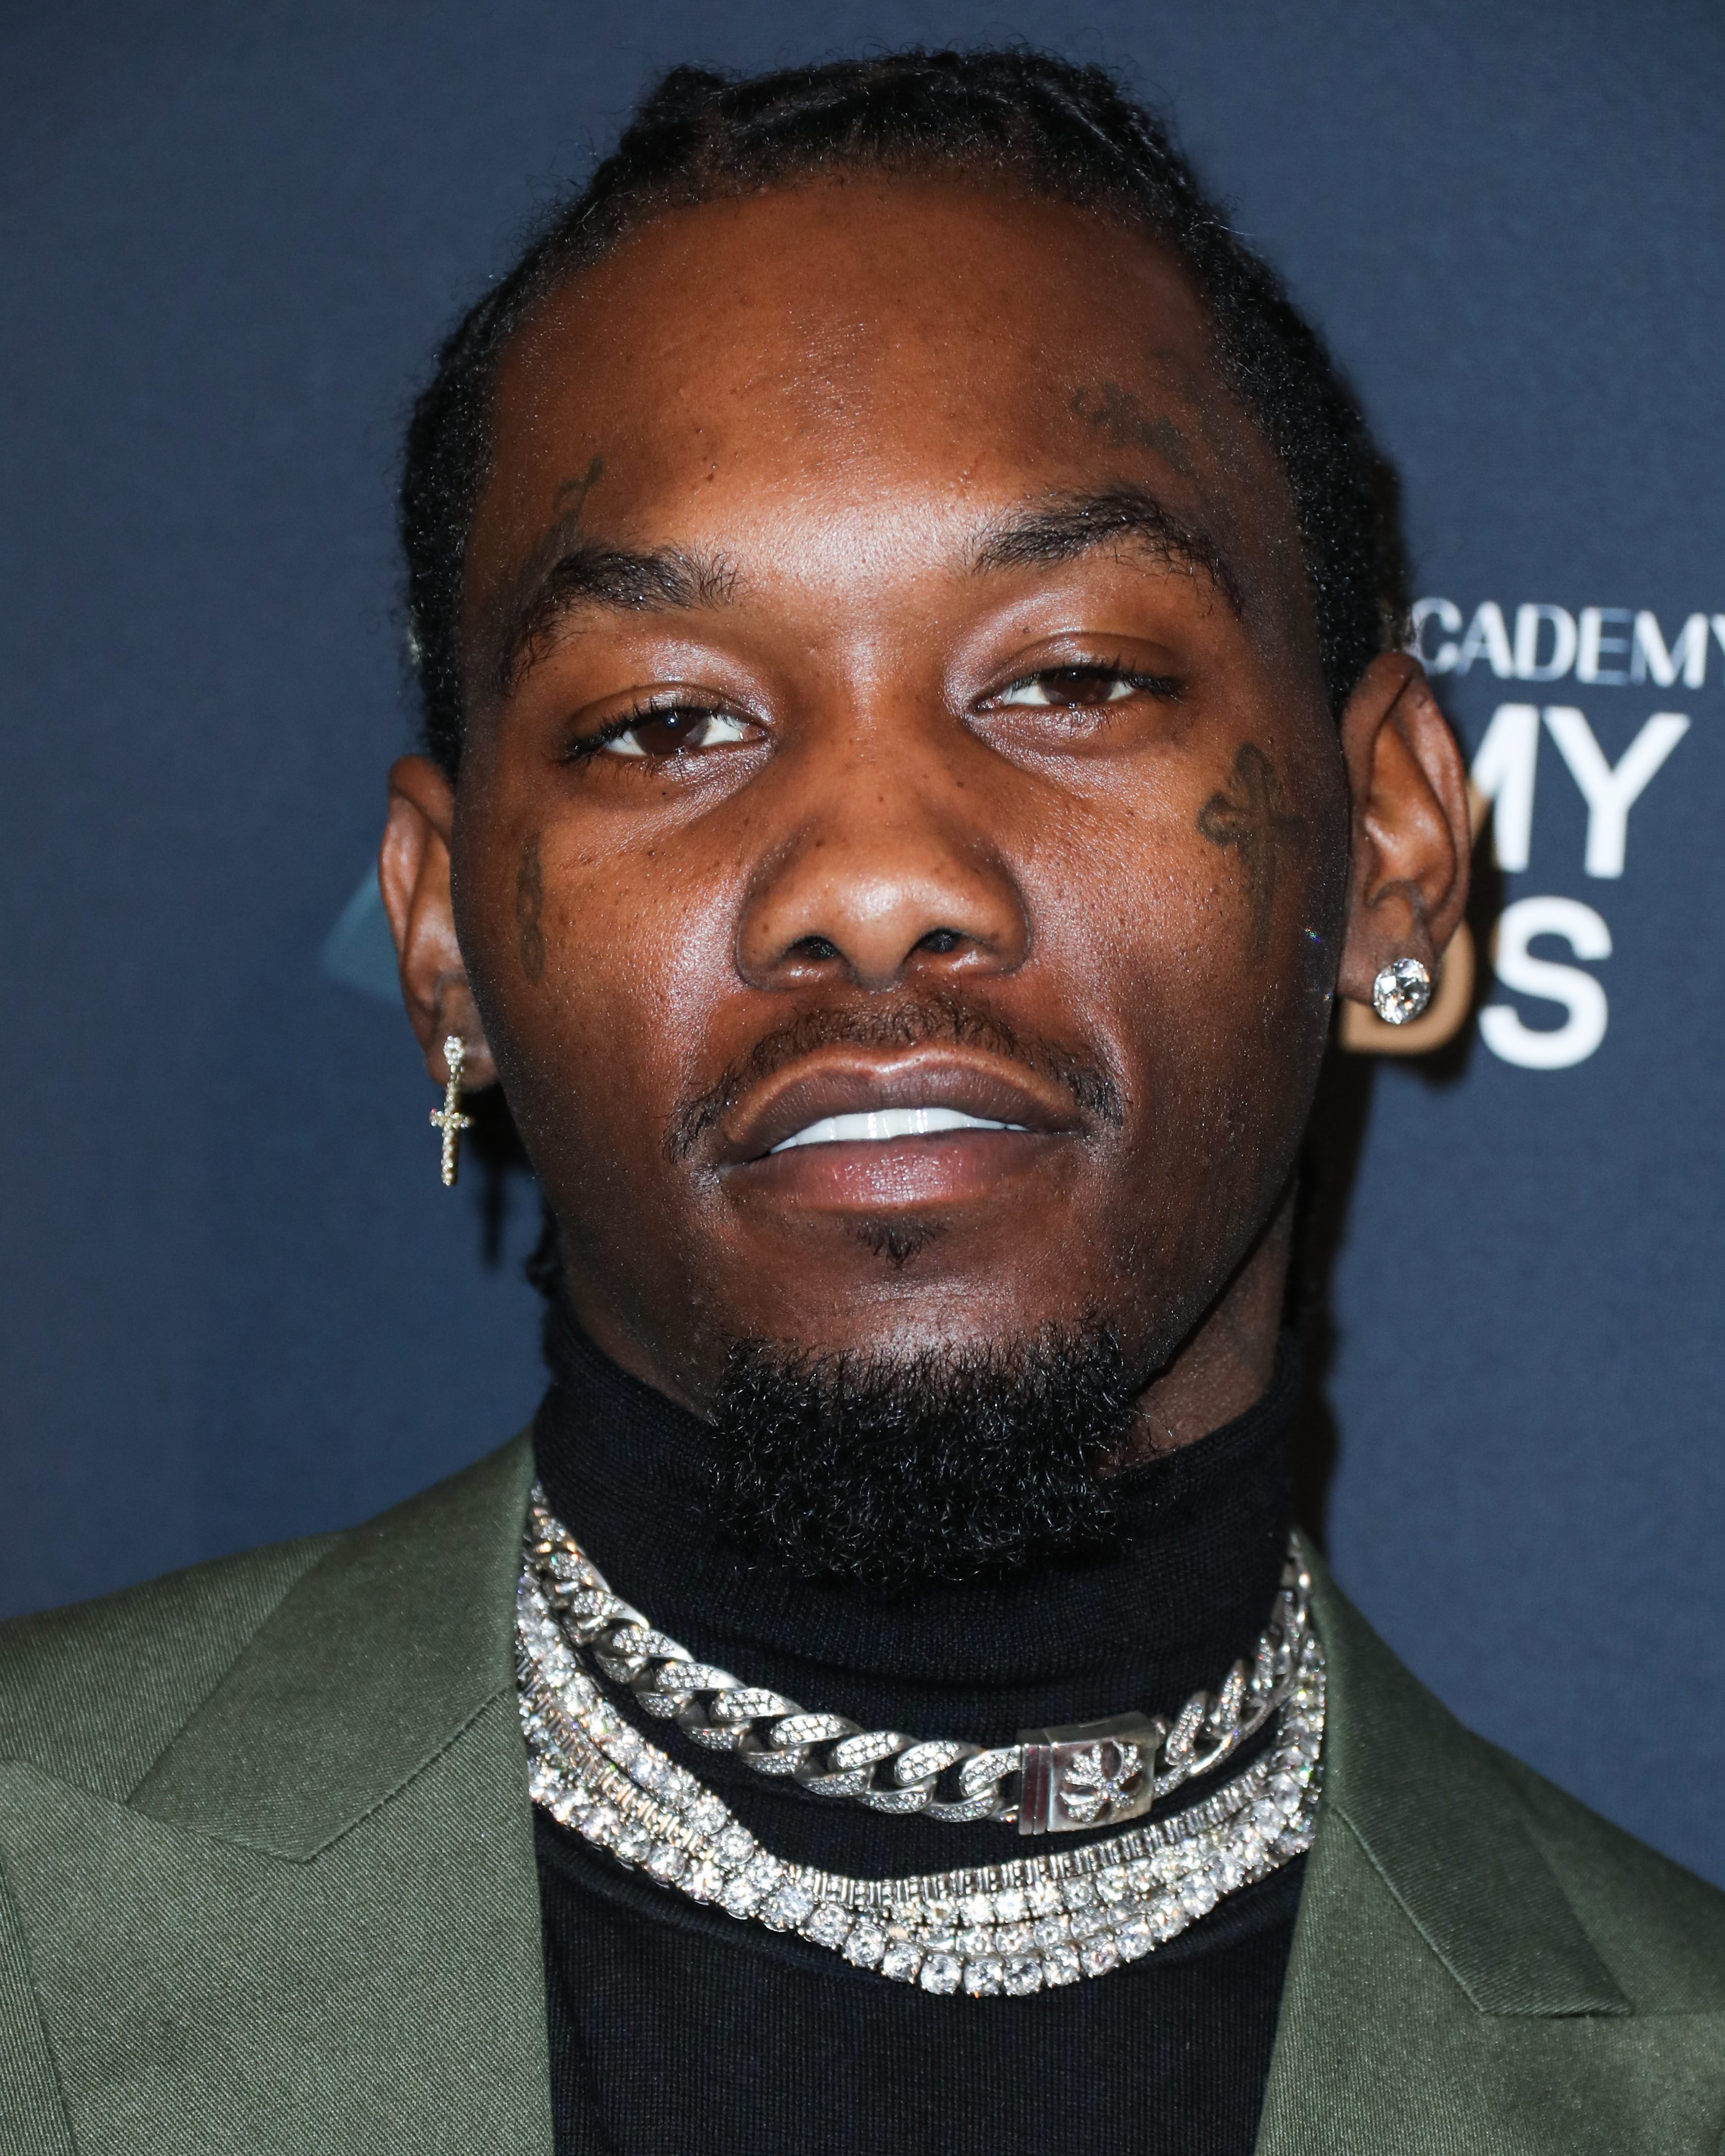 Offset arrives at The Recording Academy And Clive Davis&apos; 2020 Pre-GRAMMY Gala held at The Beverly Hilton Hotel on January 25, 2020 in Beverly Hills, Los Angeles, California, United States.